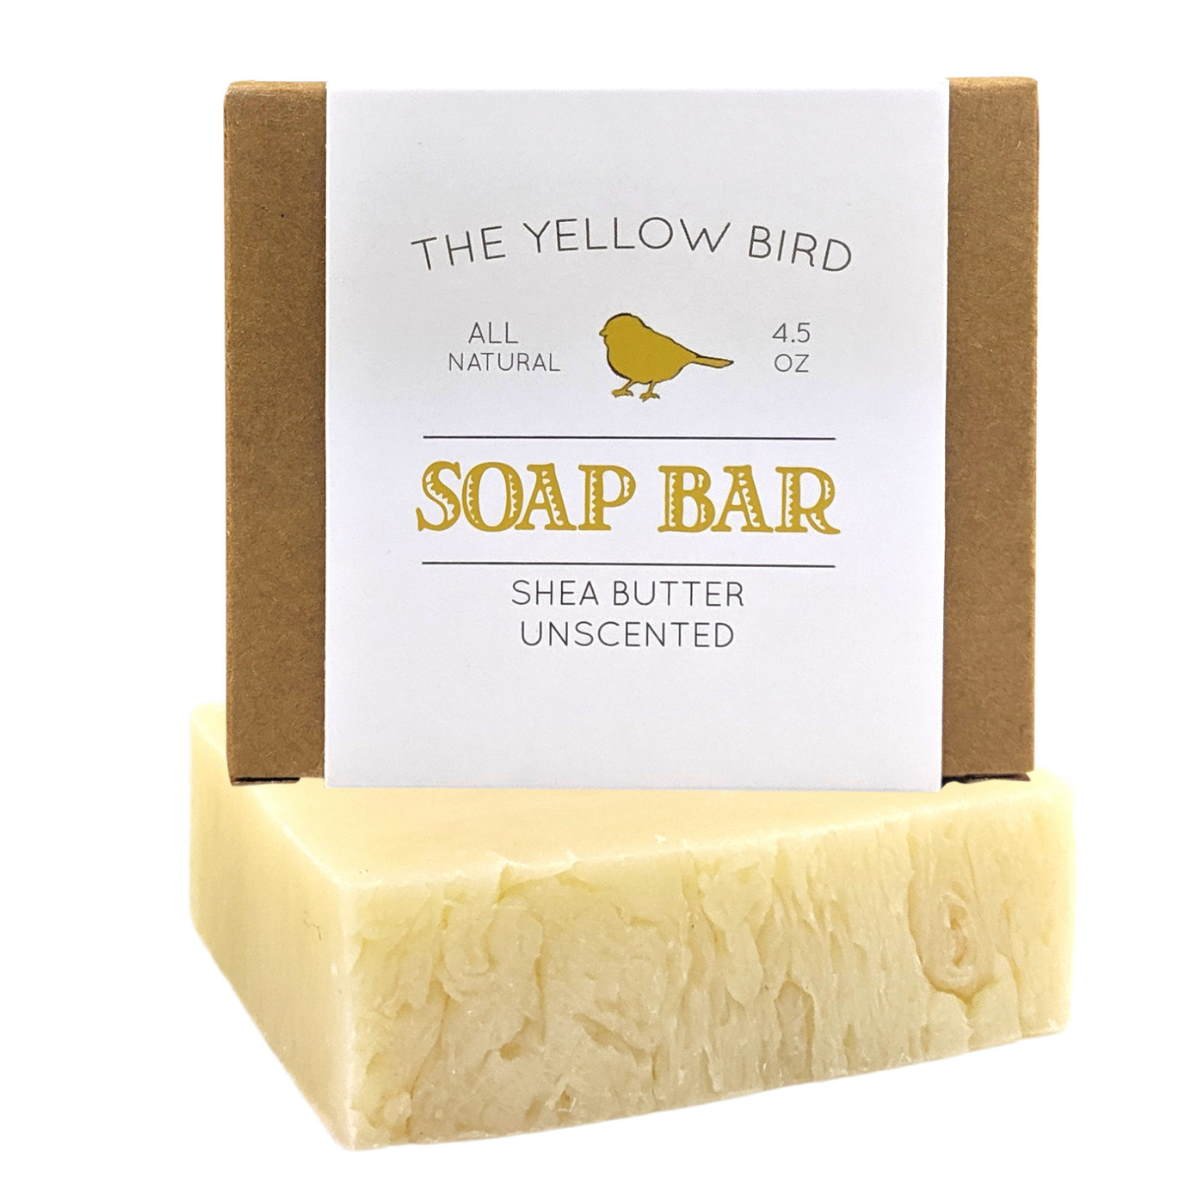 A bar of soap made by The Yellow Bird. This soap is all natural, made of shea butter, and is unscented.